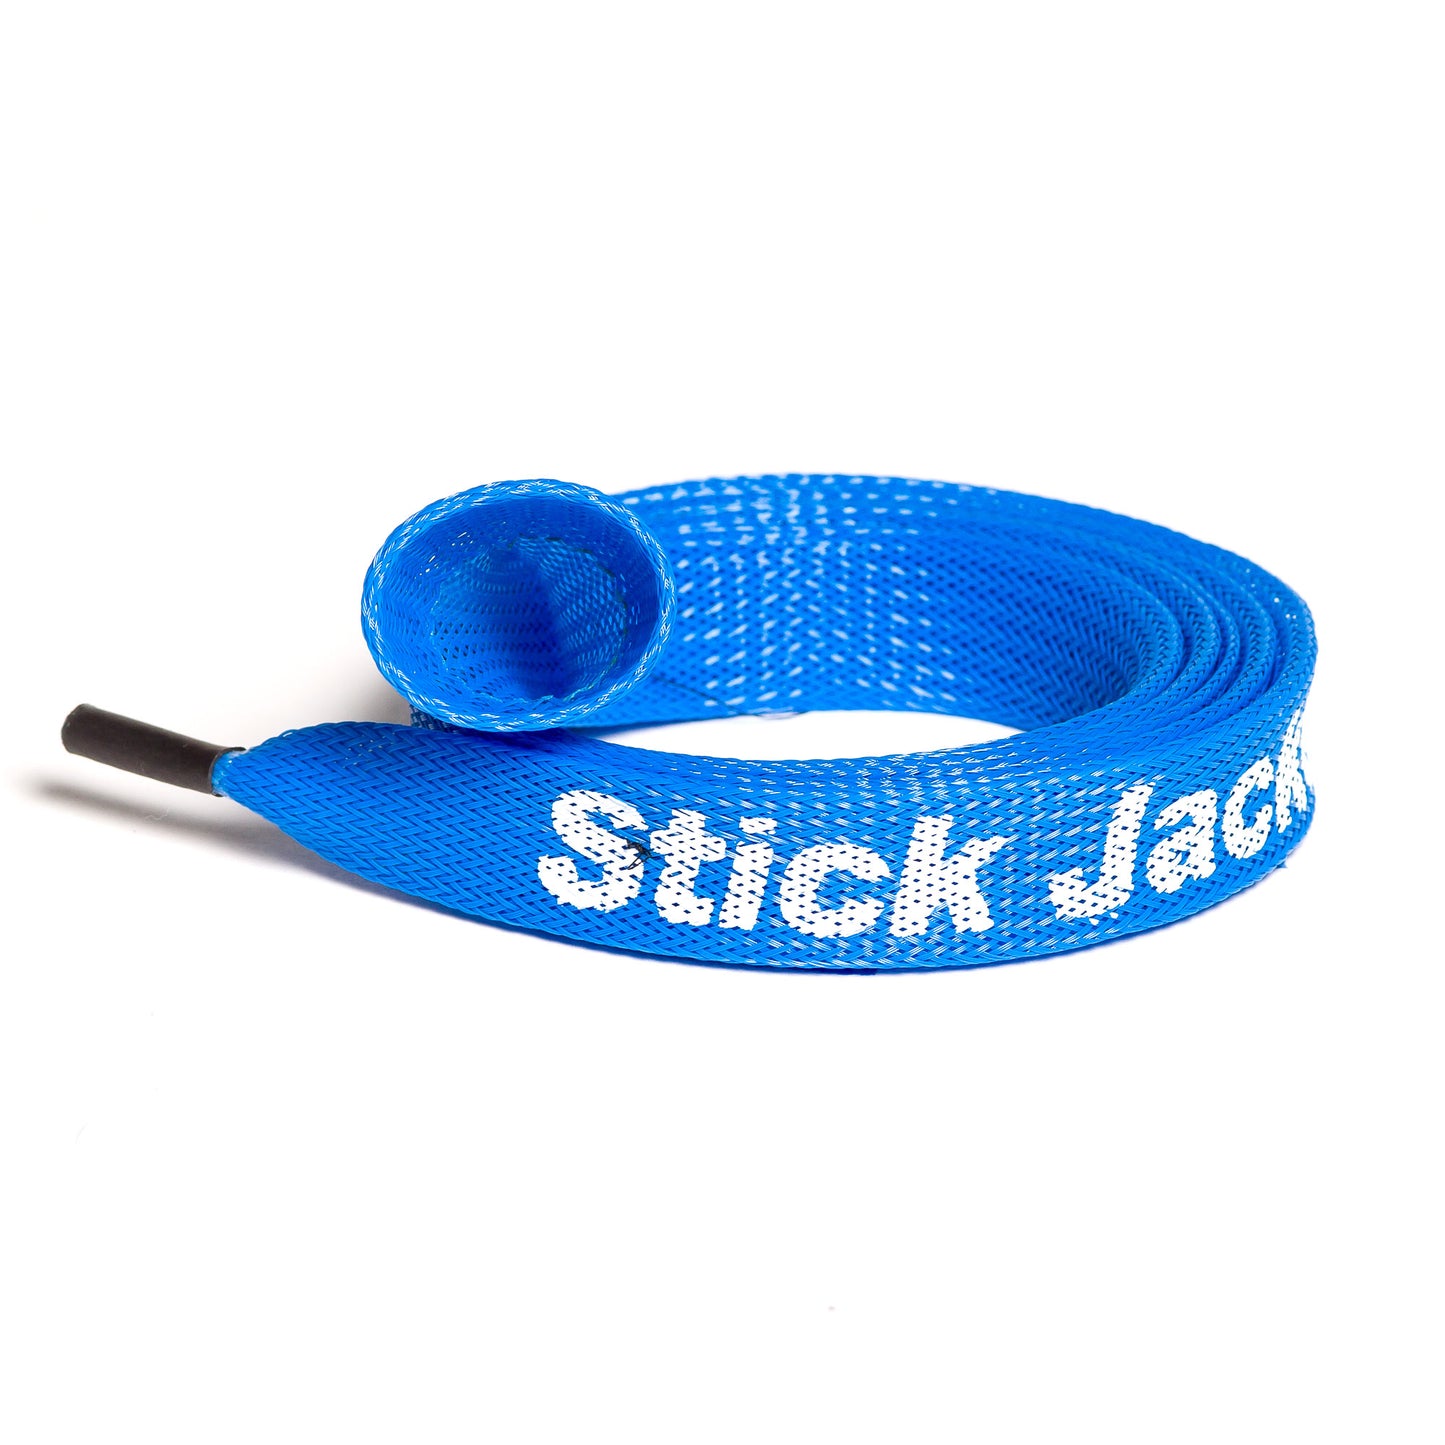 Blue Spinning Stick Jacket® Fishing Rod Cover For Rods up to 7-1/2'